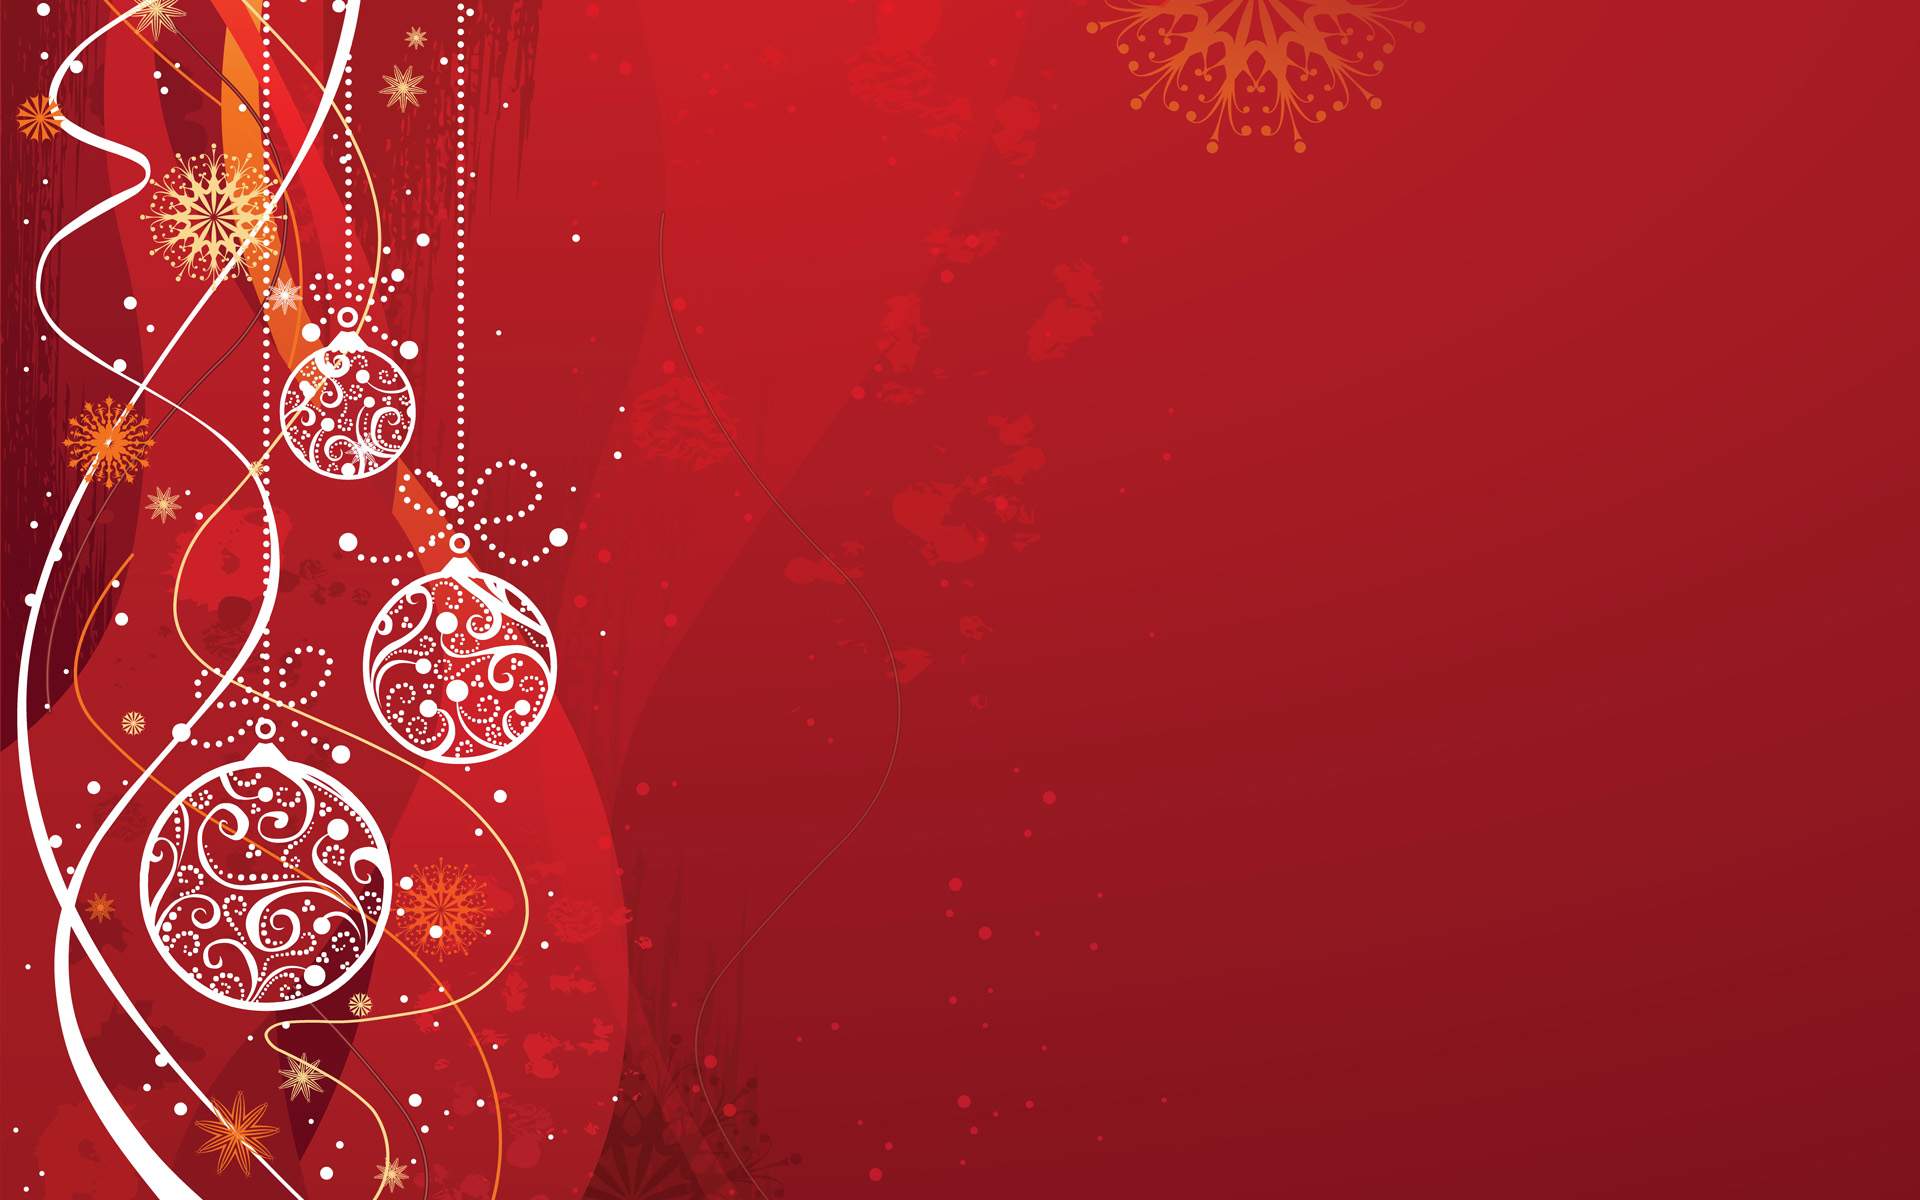 Christmas Backgrounds Free Download 